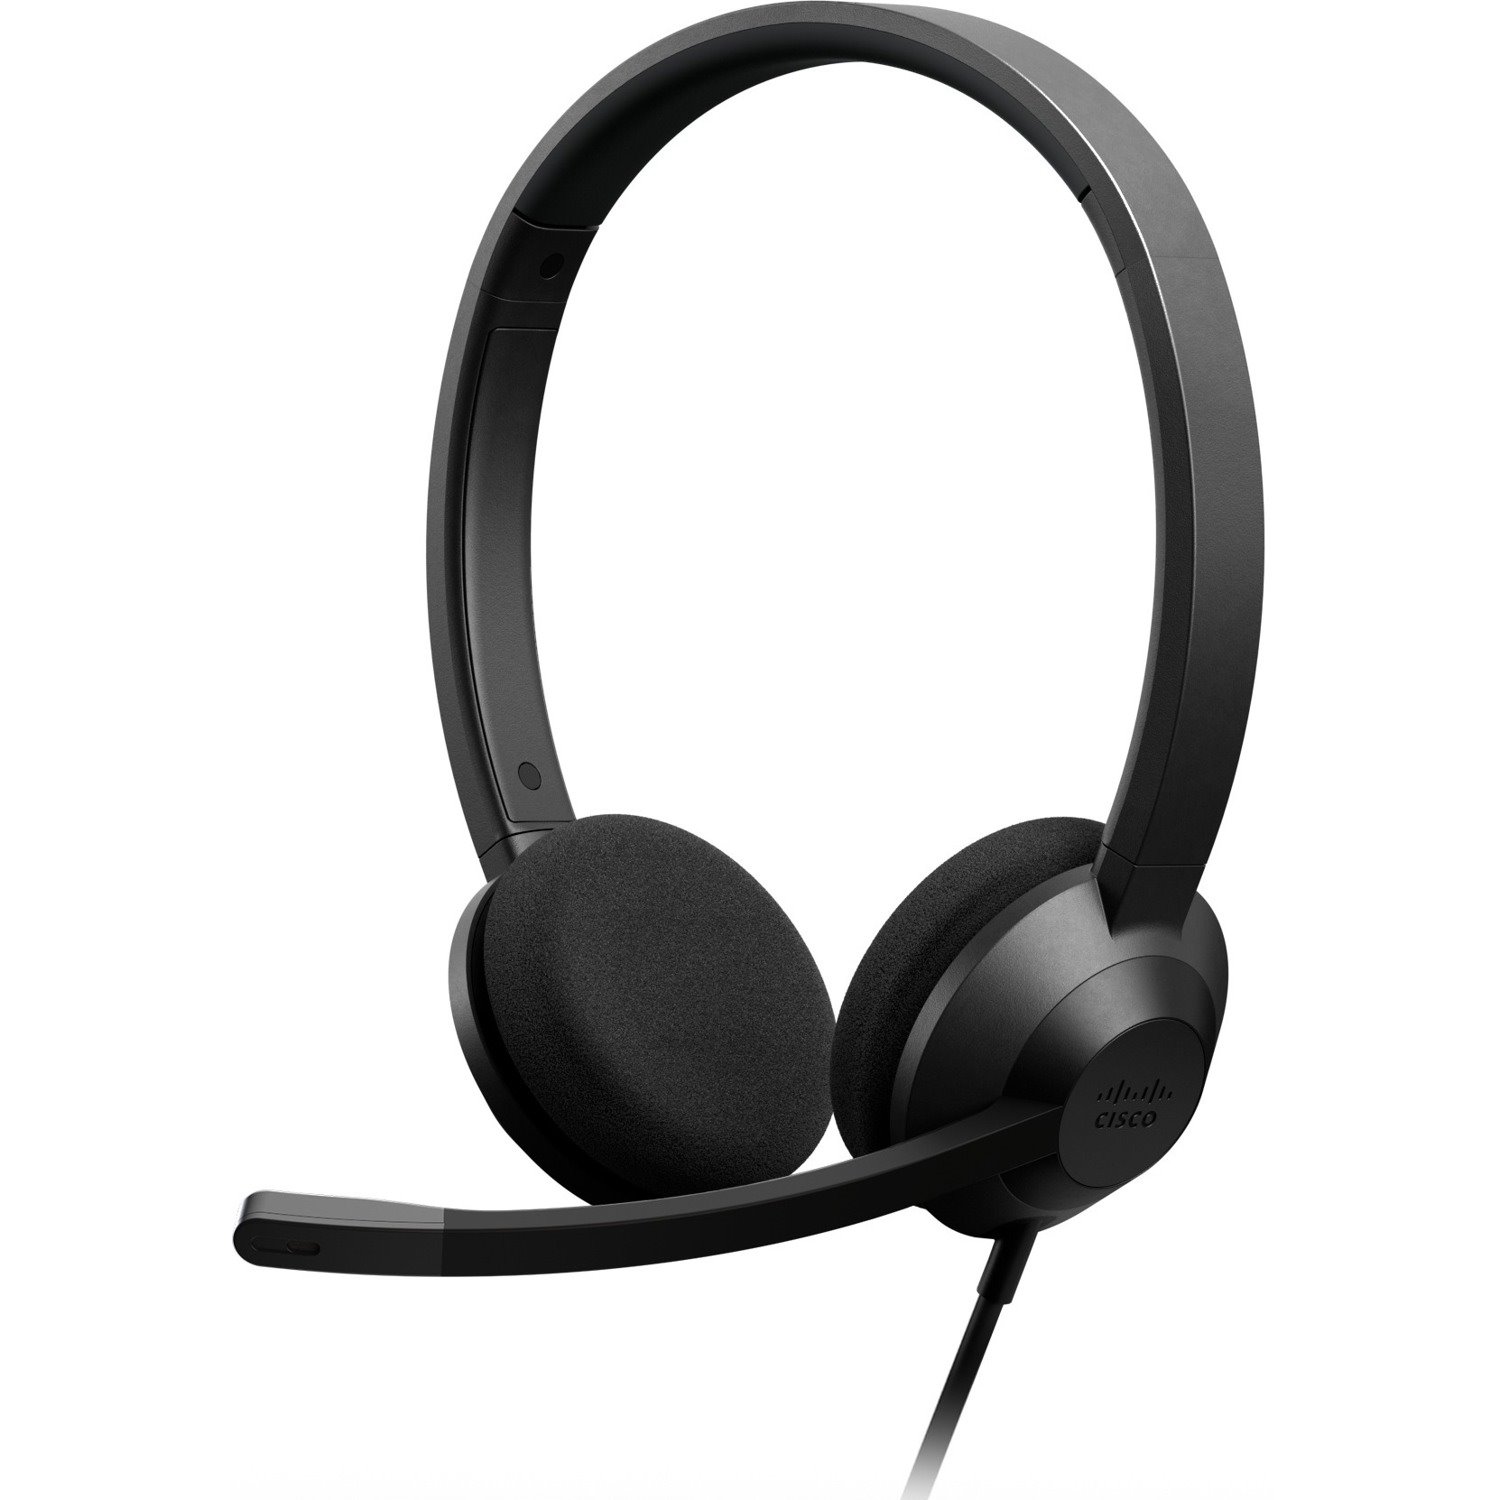 Cisco Headset 322 Wired Dual On-Ear Carbon Black USB-A